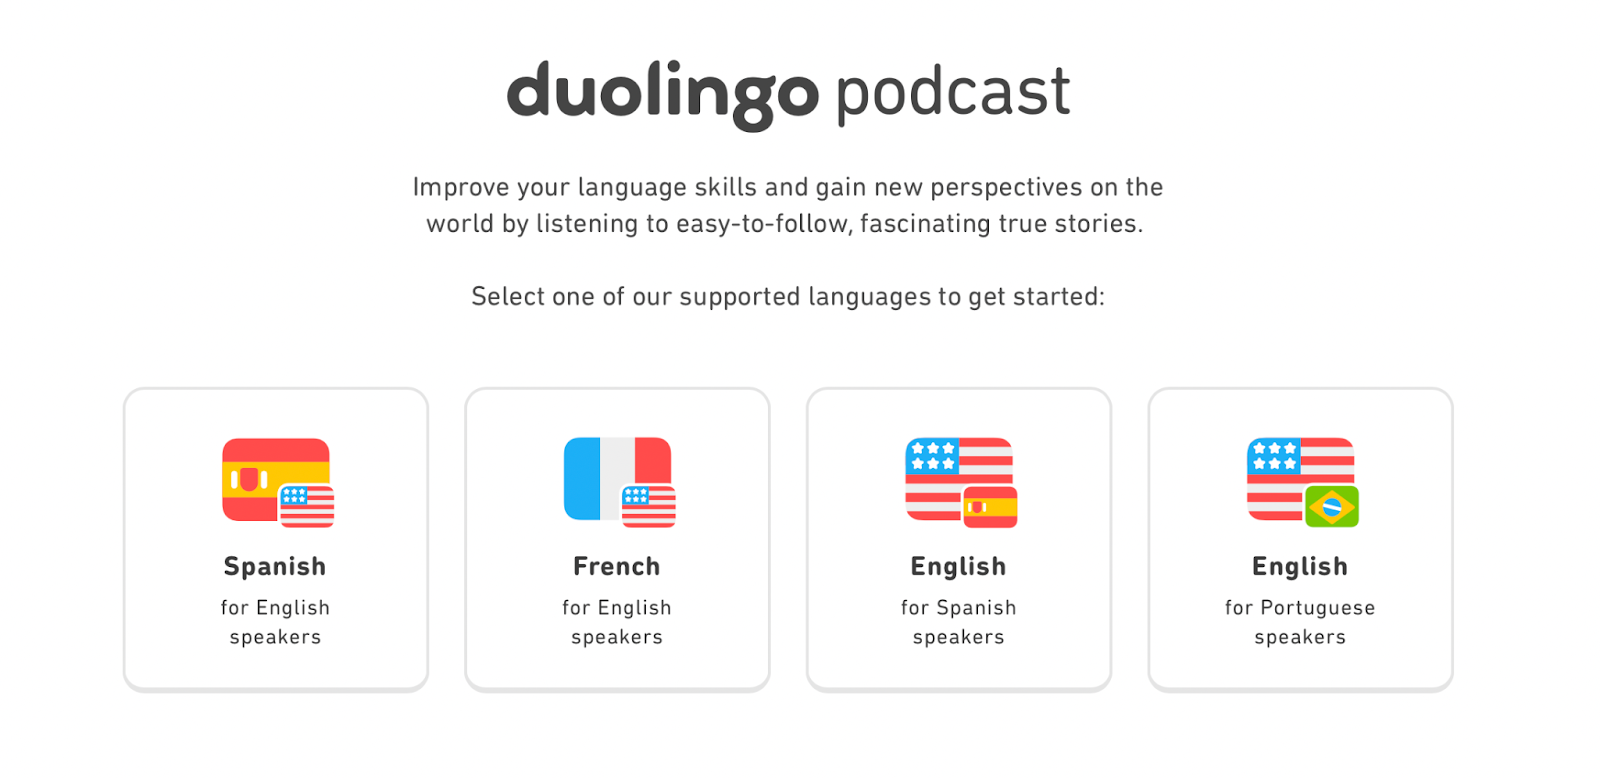 Brands’ Podcasts Dissected: All About the Duolingo Podcast